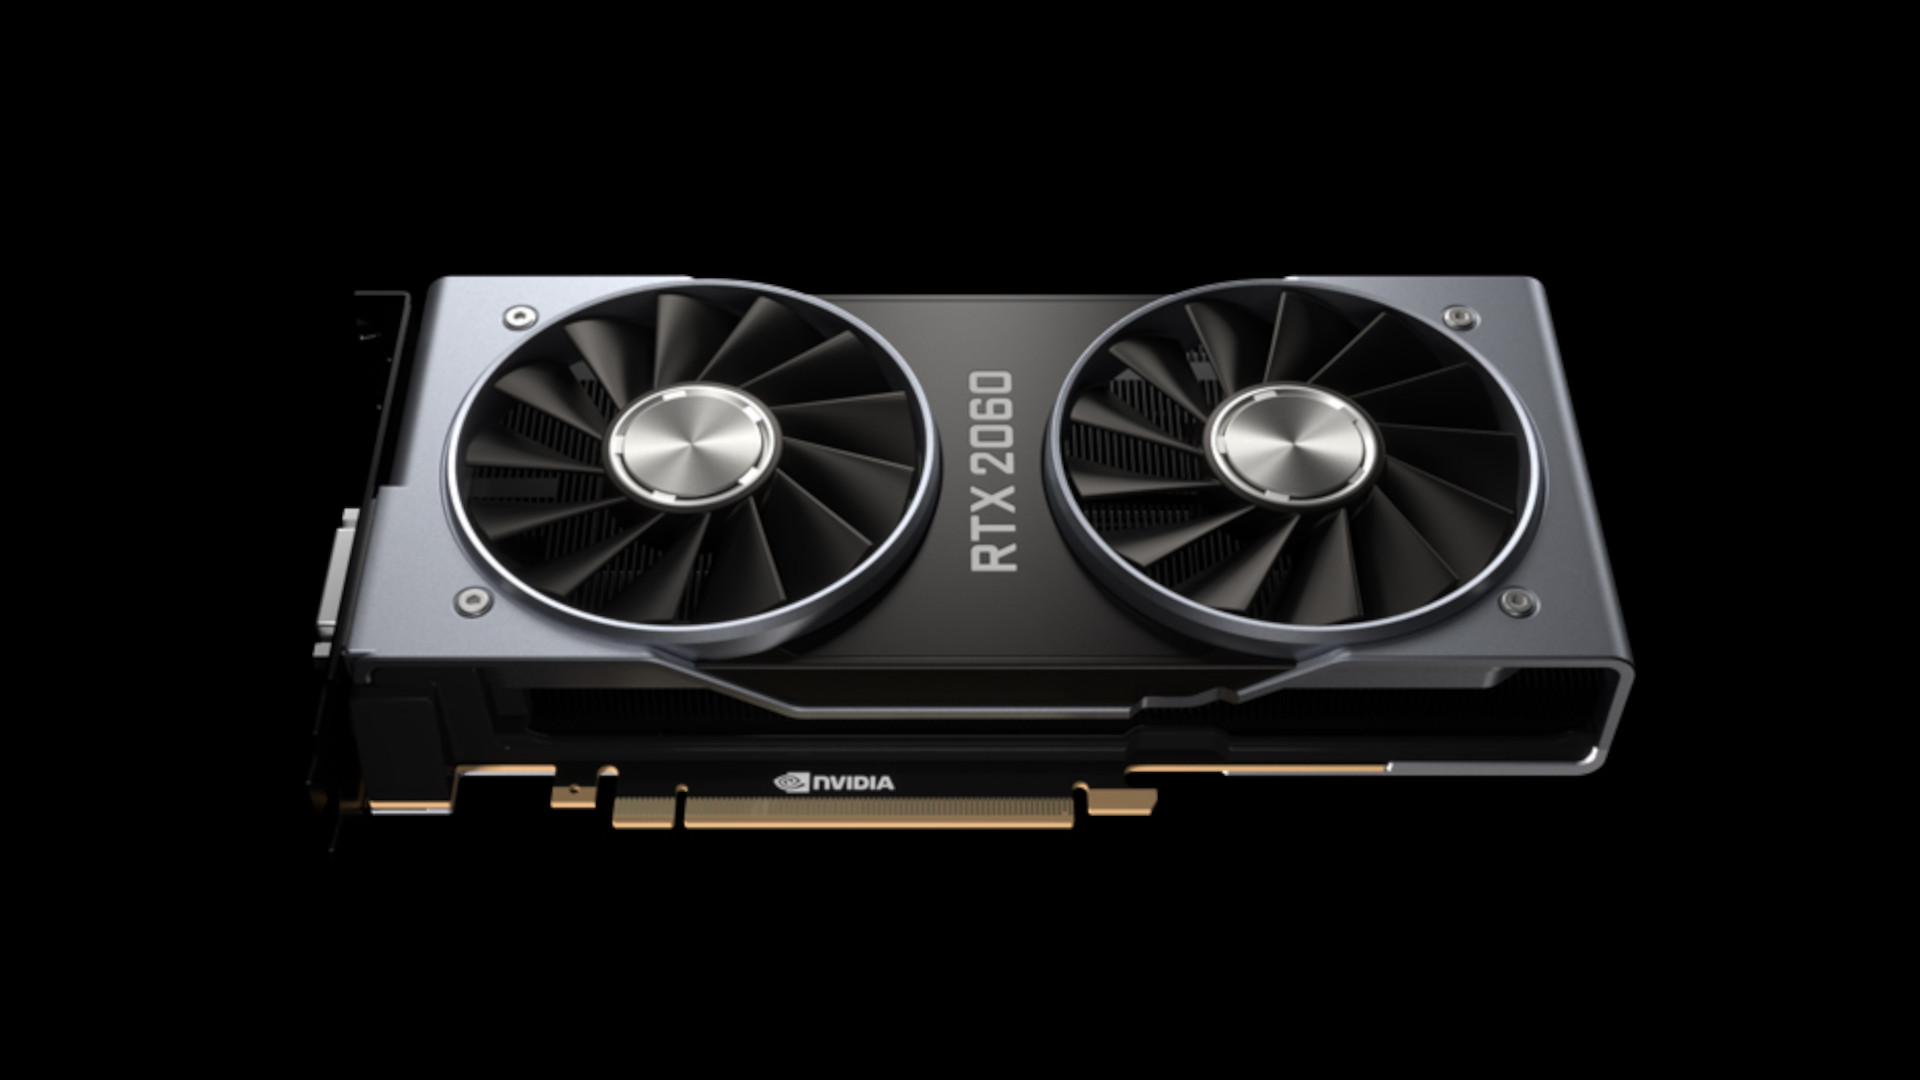 Nvidia expects RTX 2060 12GB GPU stock to improve by the end of the month